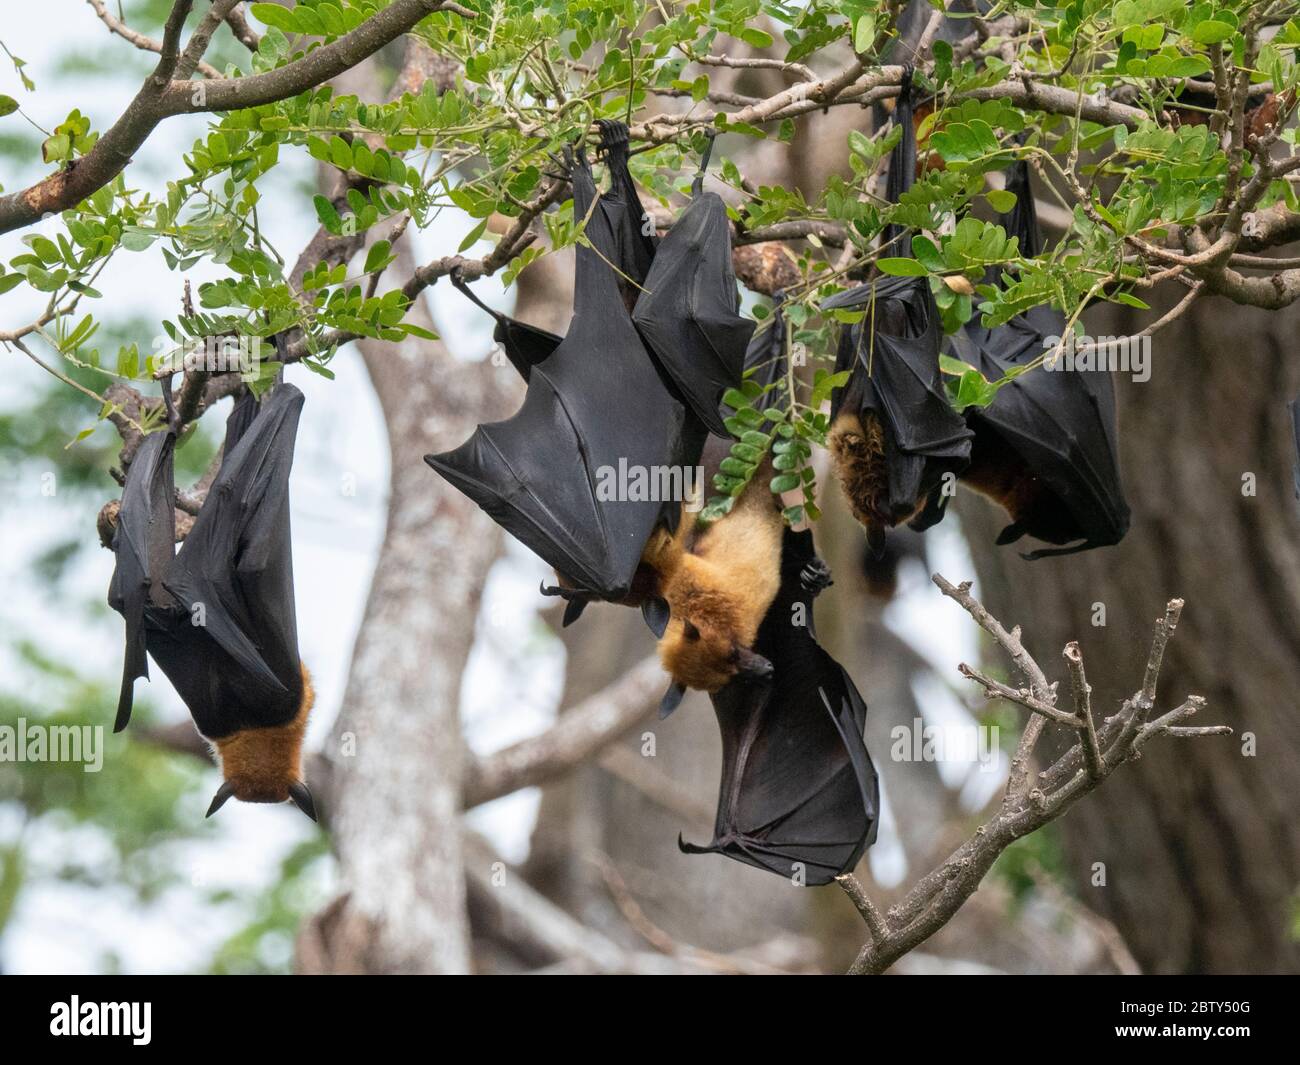 Adult Indian flying foxes (Pteropus medius) roosting during the day near Yala National Park, Sri Lanka, Asia Stock Photo